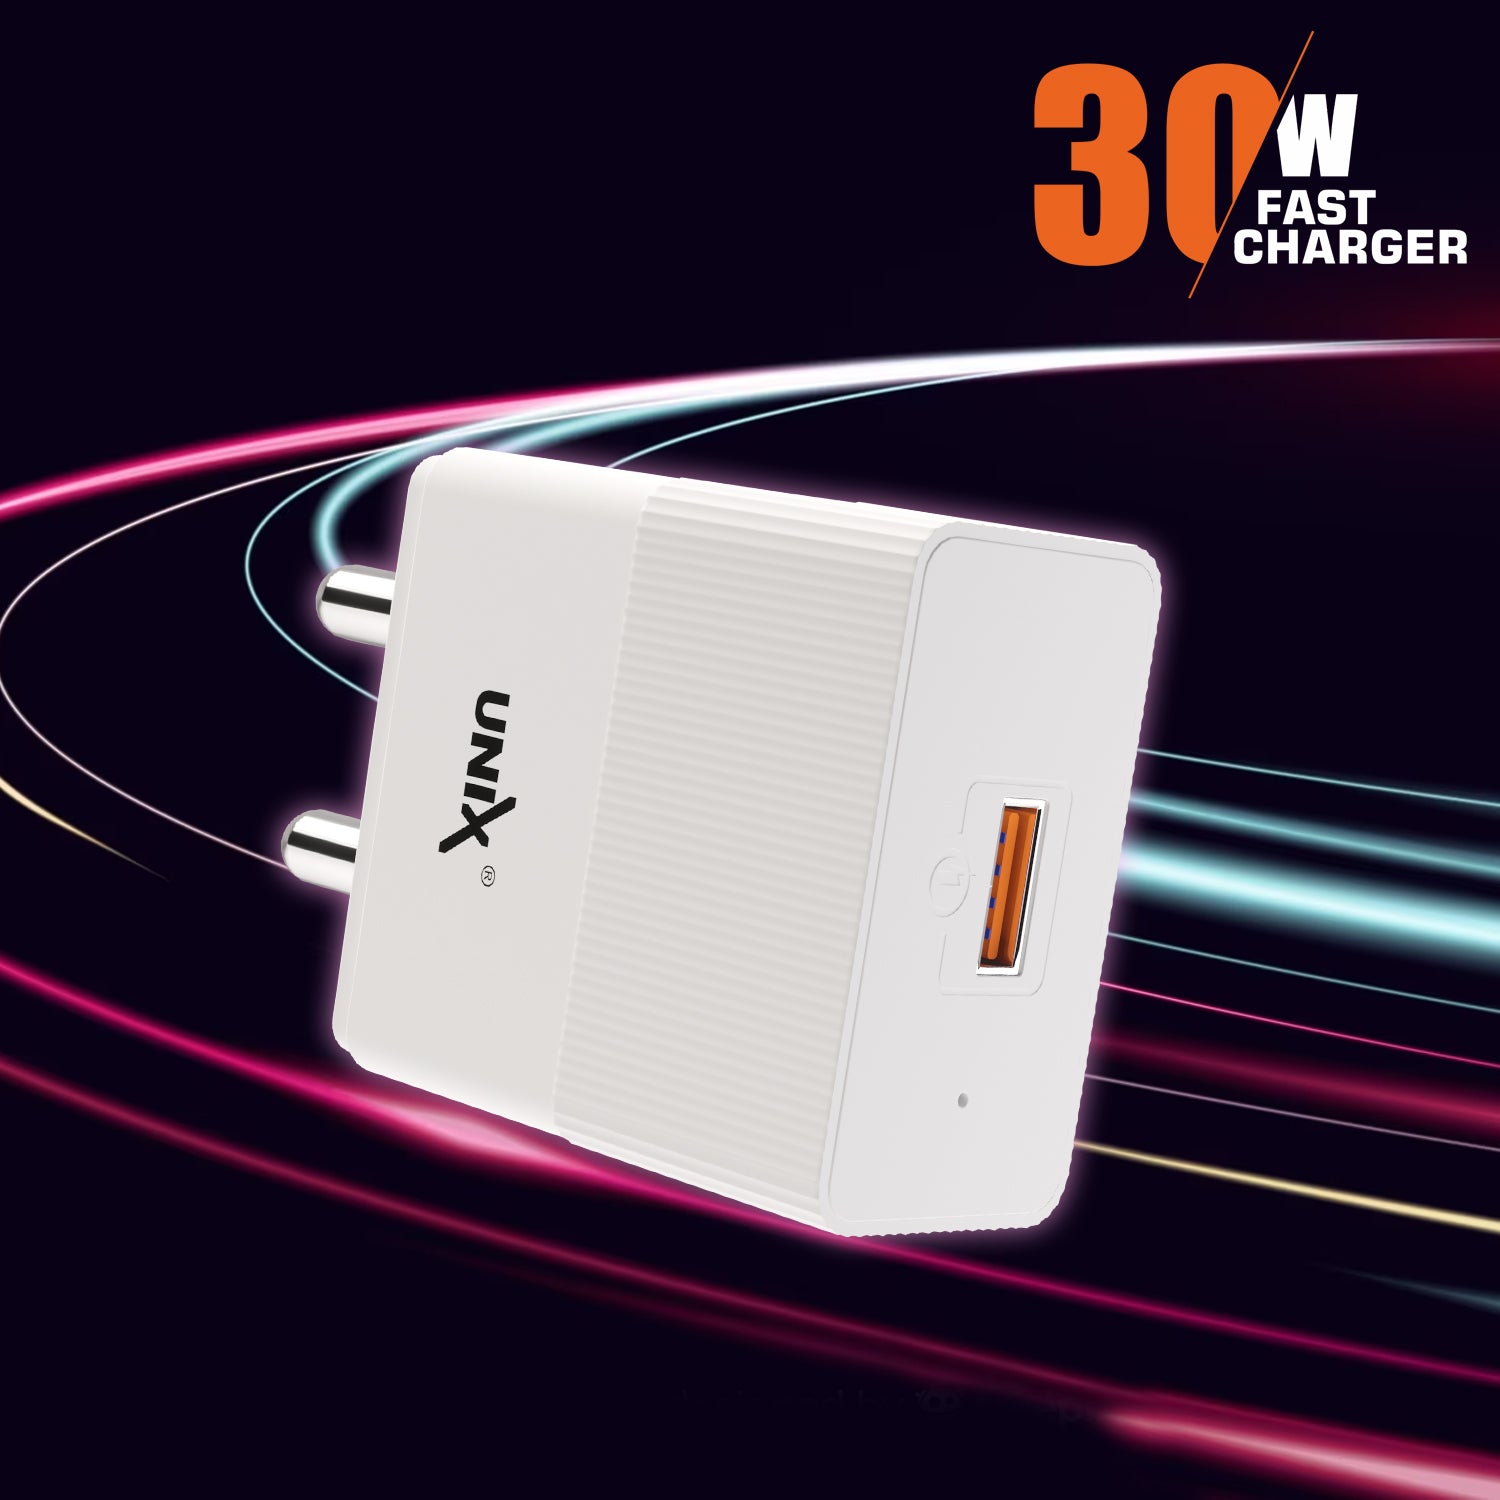 Unix UX-111 - Best Fast Charger for Android front